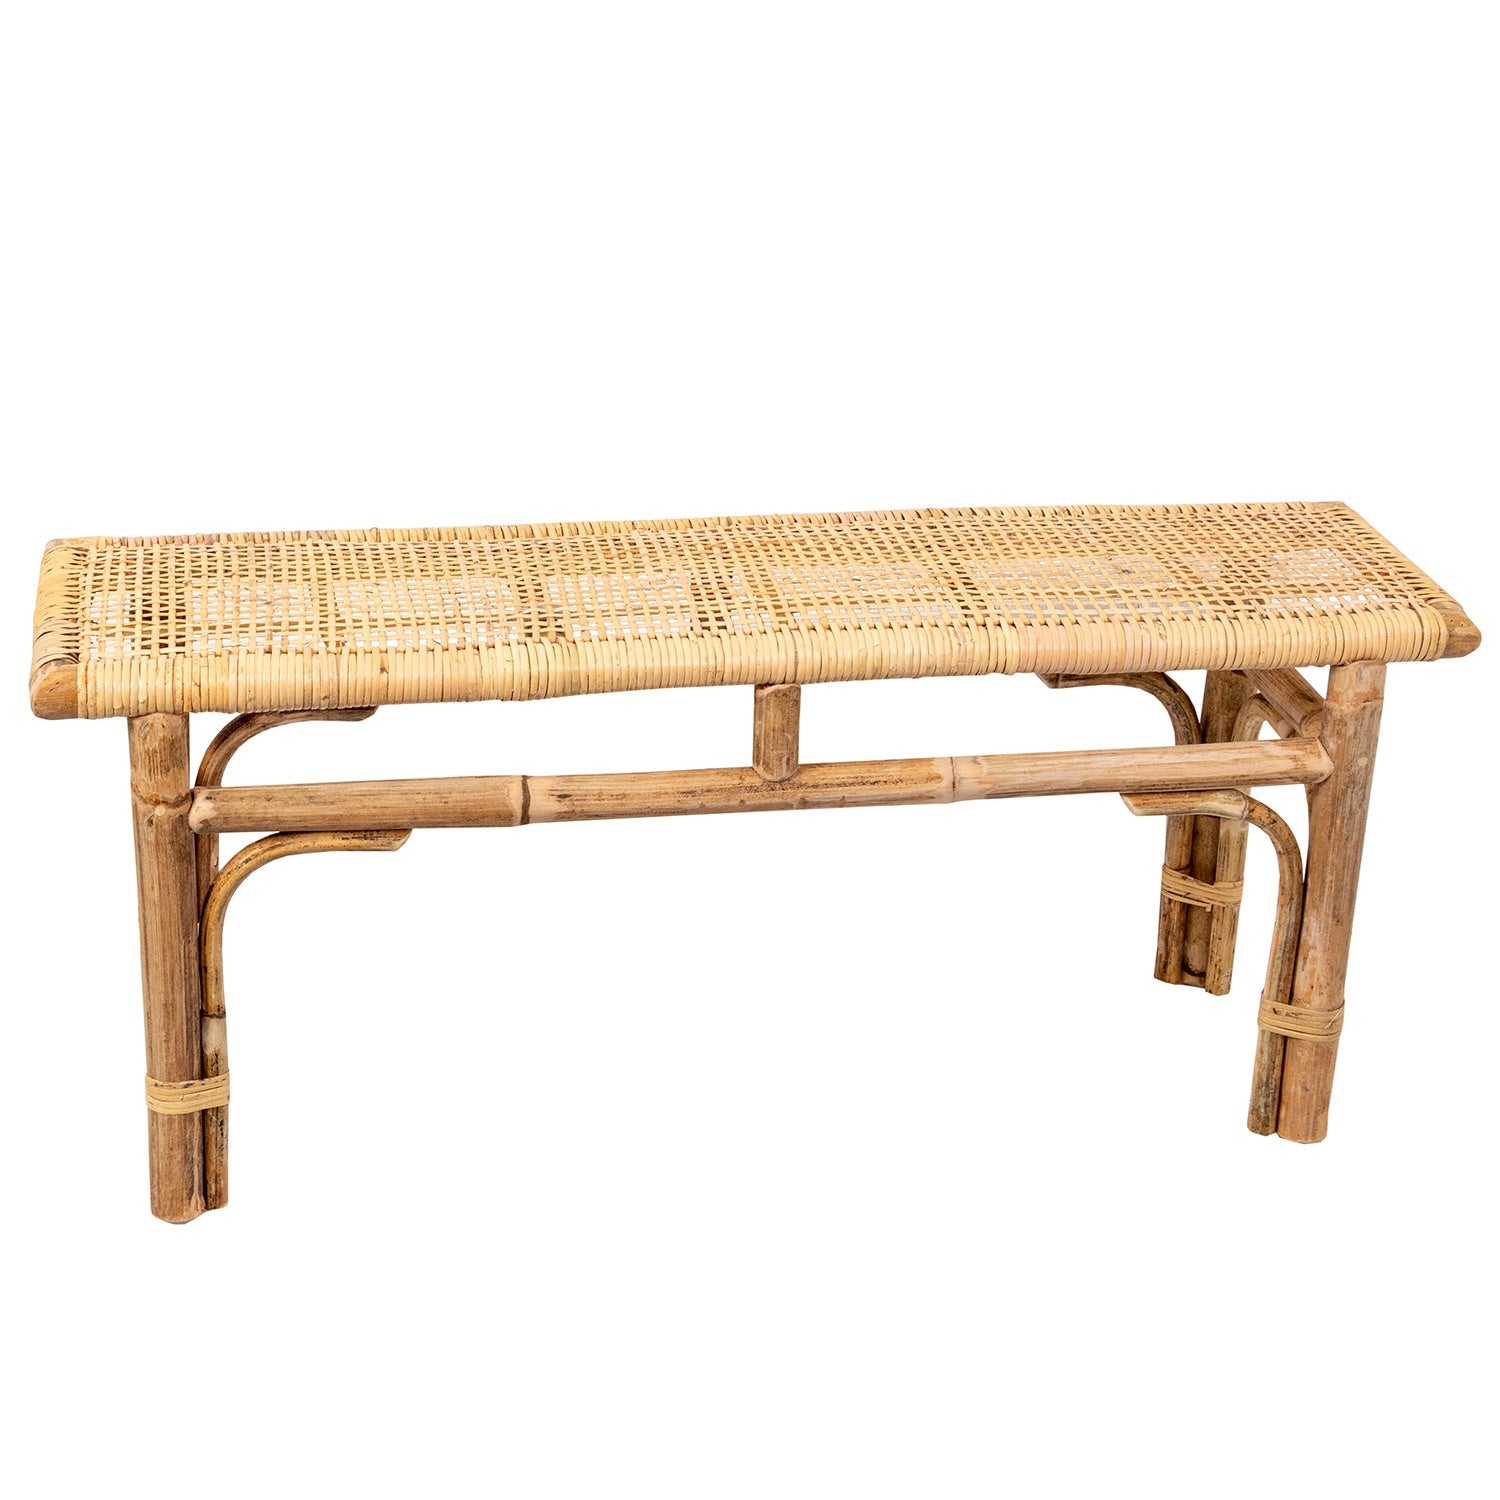 BENCH SEAT WITH WOVEN TOP 450 X 1100 X 300MM NATURAL